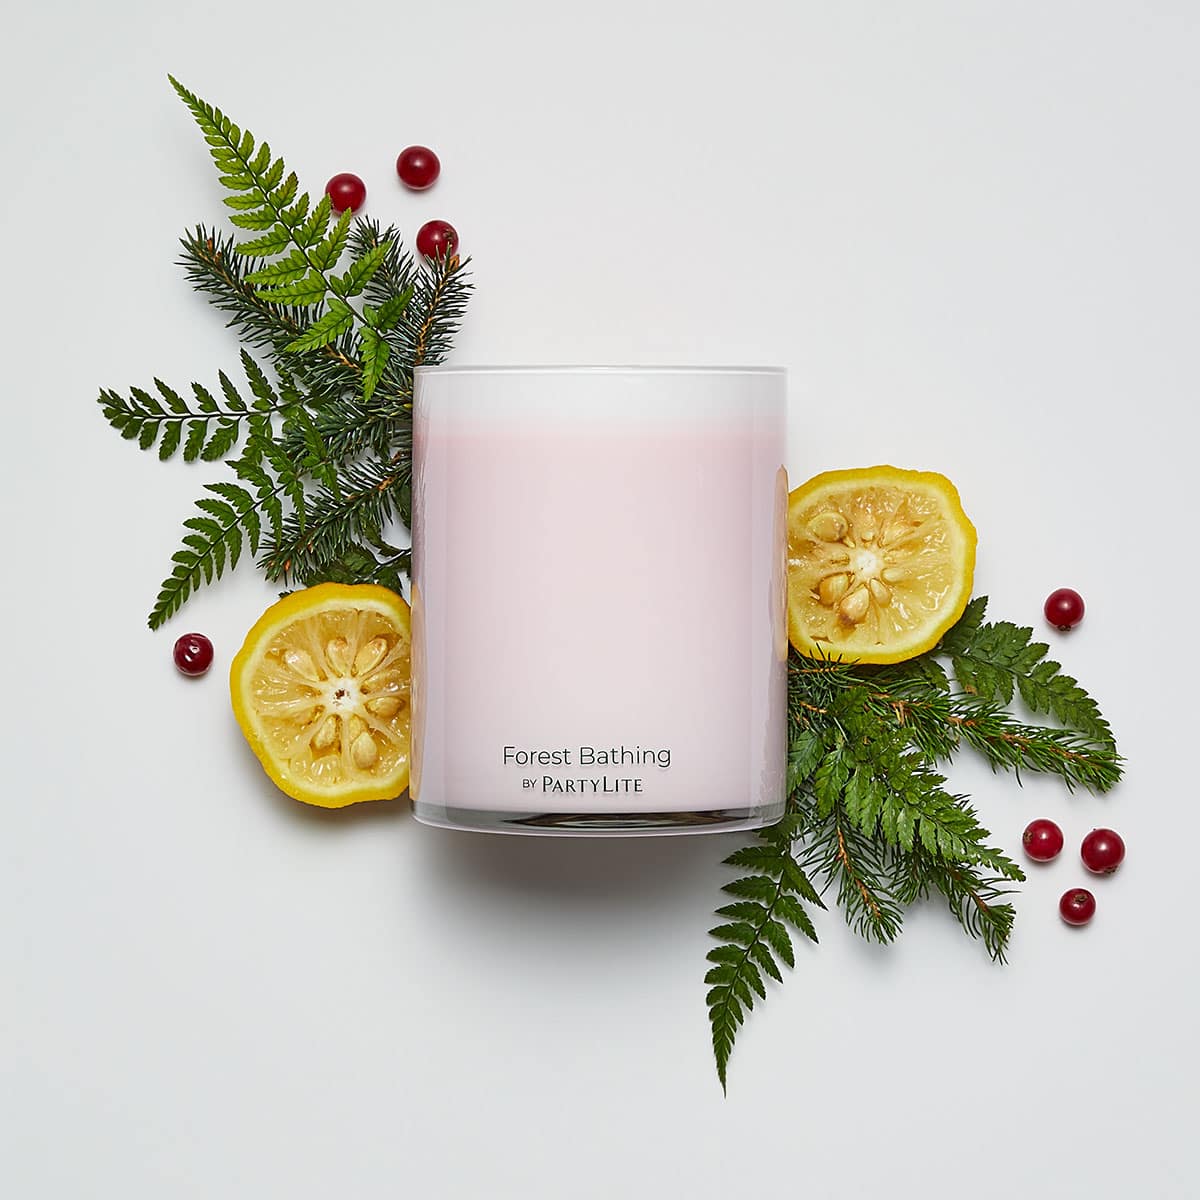 Forest Bathing Wild Woodland Berries 2-Wick Jar Candle